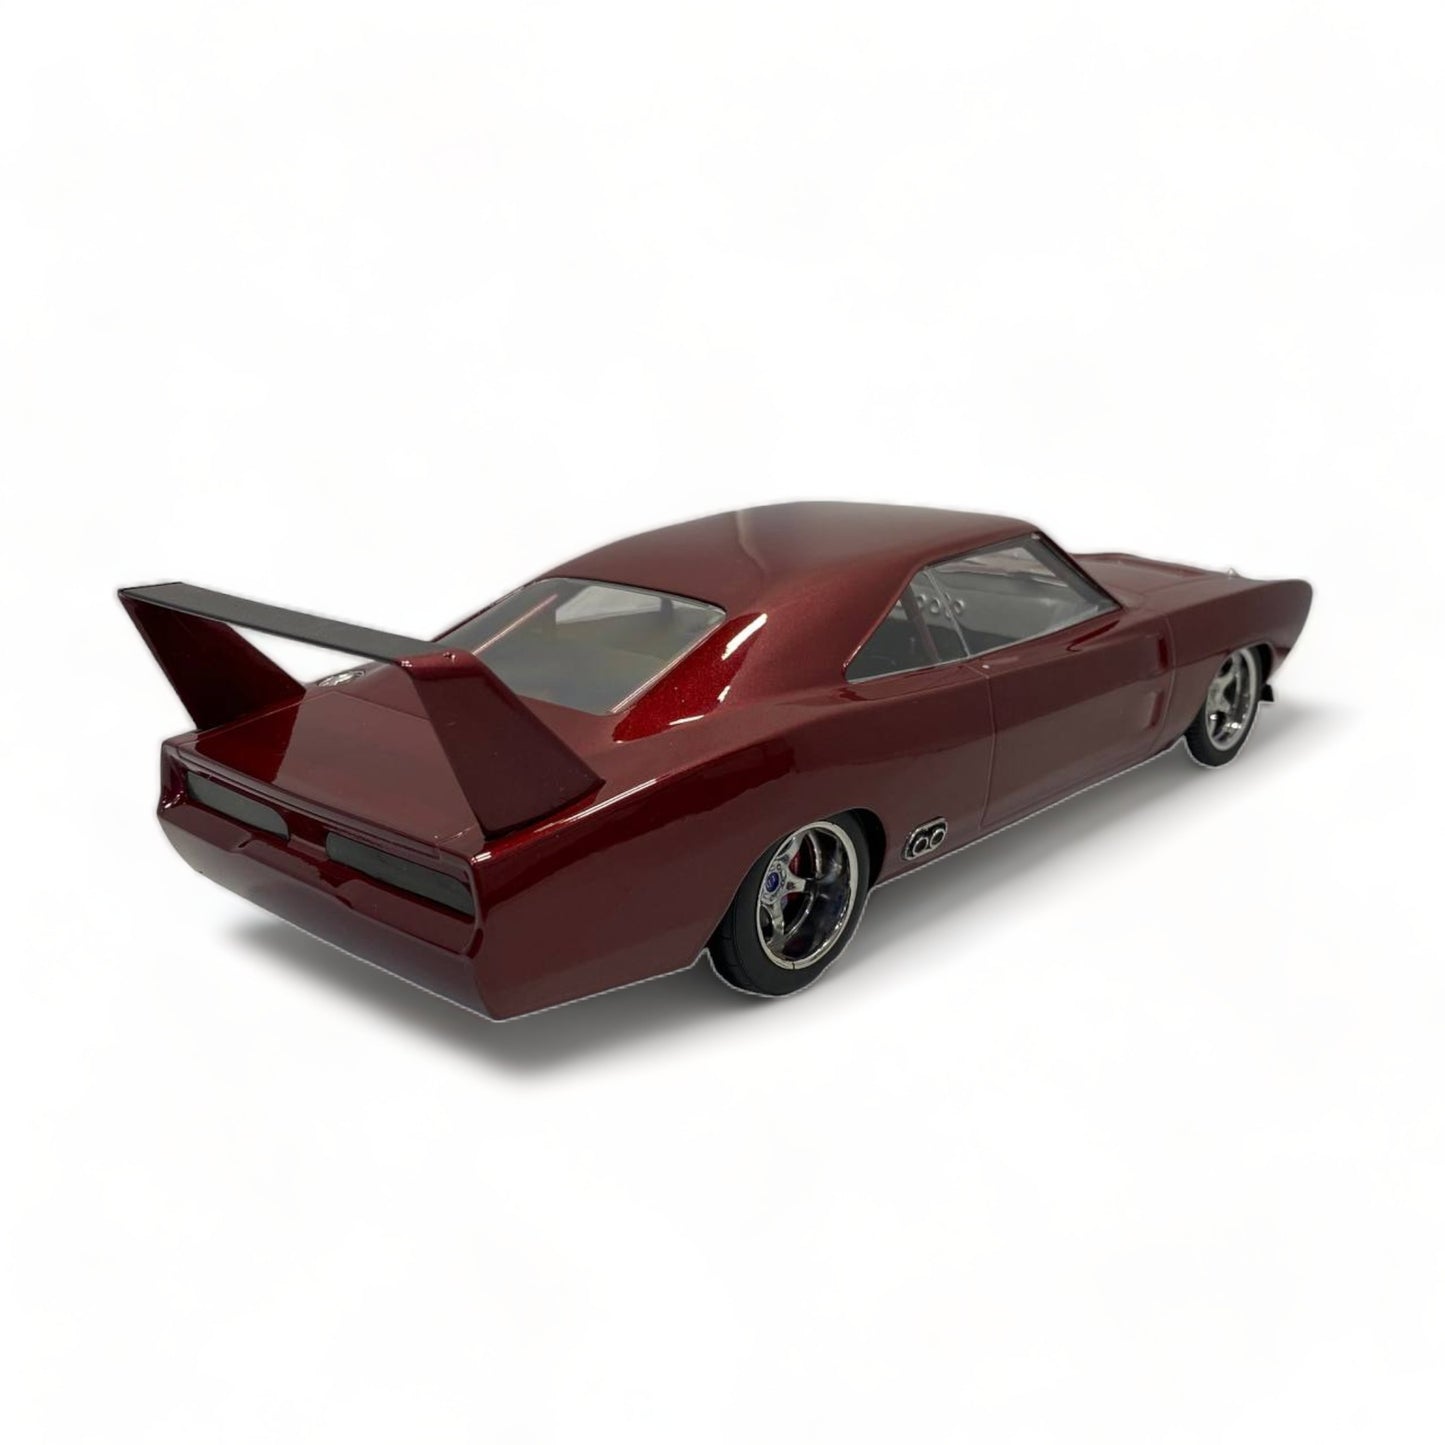 Greenlight Dodge Charger Daytona Fast & Furious - Maroon (1969, 1/18 Scale)